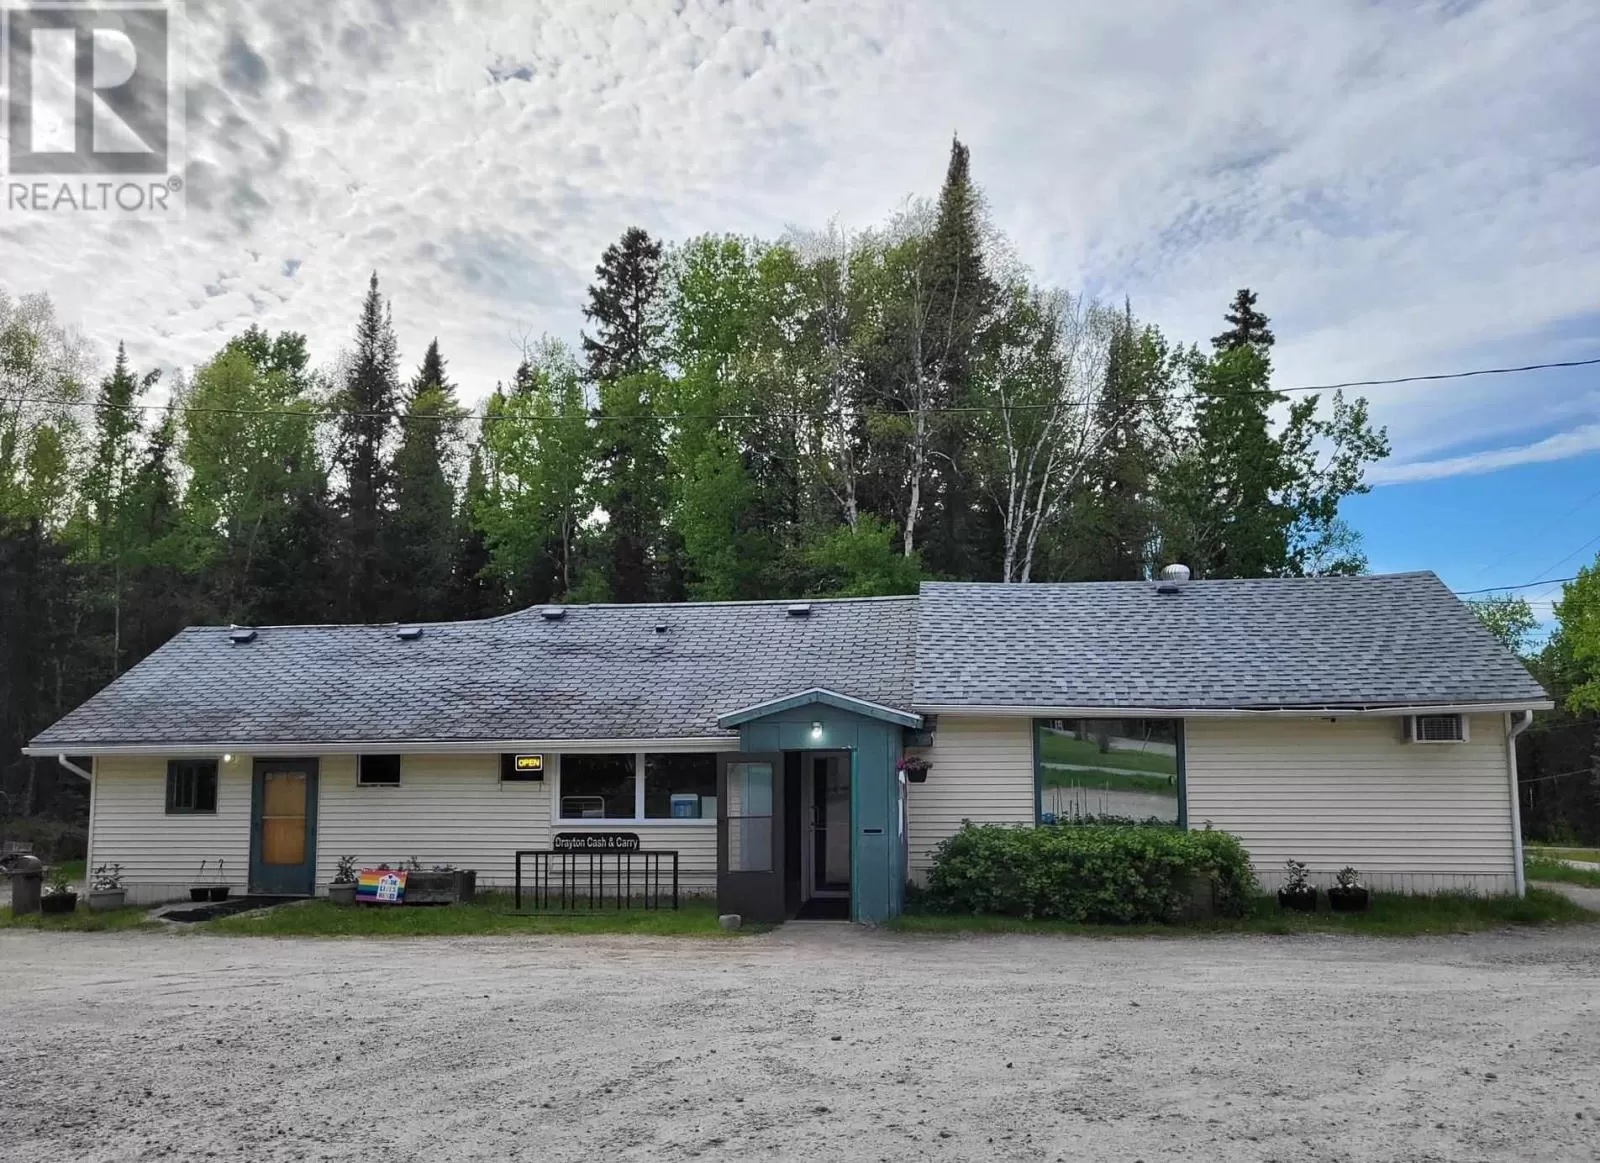 168 Drayton Rd, Sioux Lookout, Ontario P8T 0A7